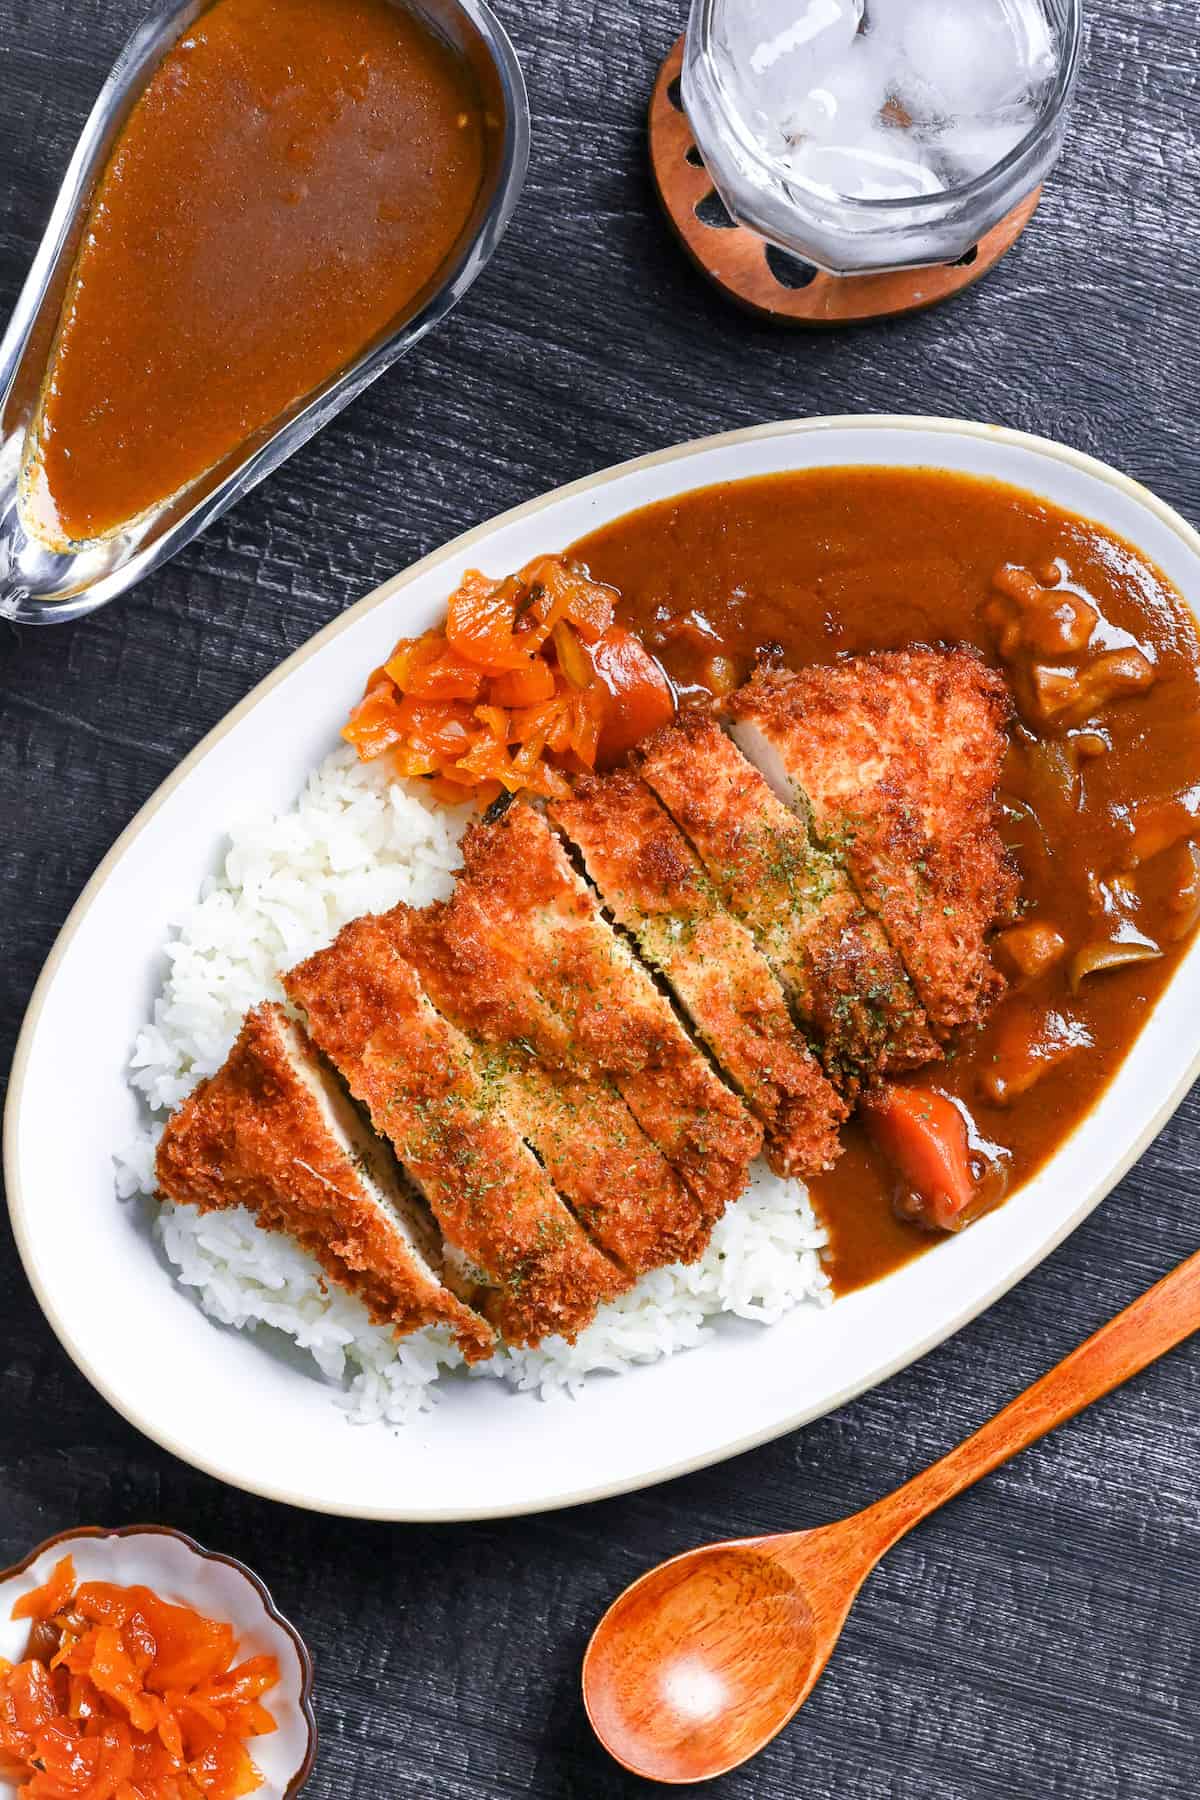 Japanese chicken katsu curry served on a white oval-shaped plate with beige rim, next to a wooden spoon, bowl of pickles and gravy boat of curry on a black background